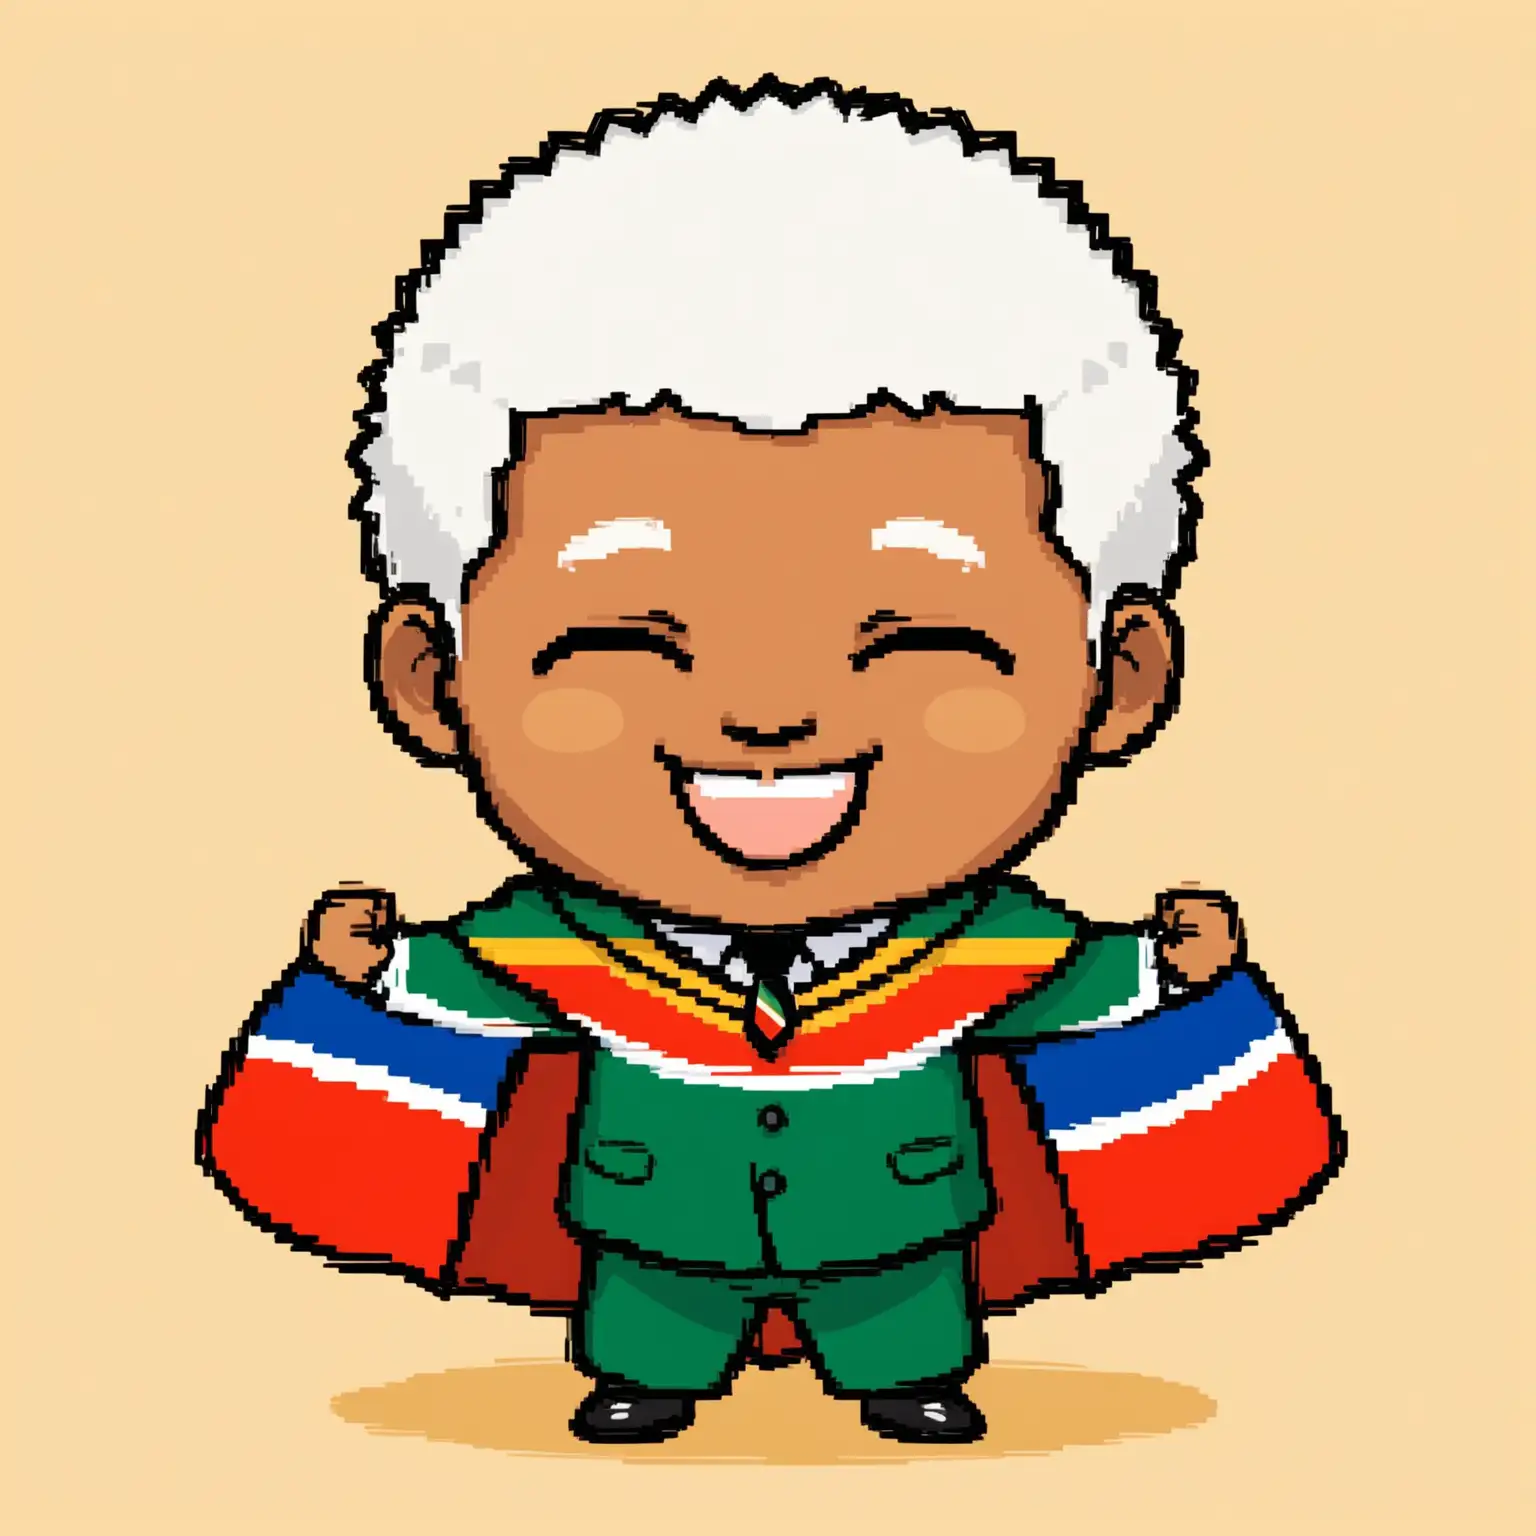 Illustrate an image of Nelson Mandela with "chibi" style. He should be wearing a south african flag cape, smiling, with raised fists. The background is a white.